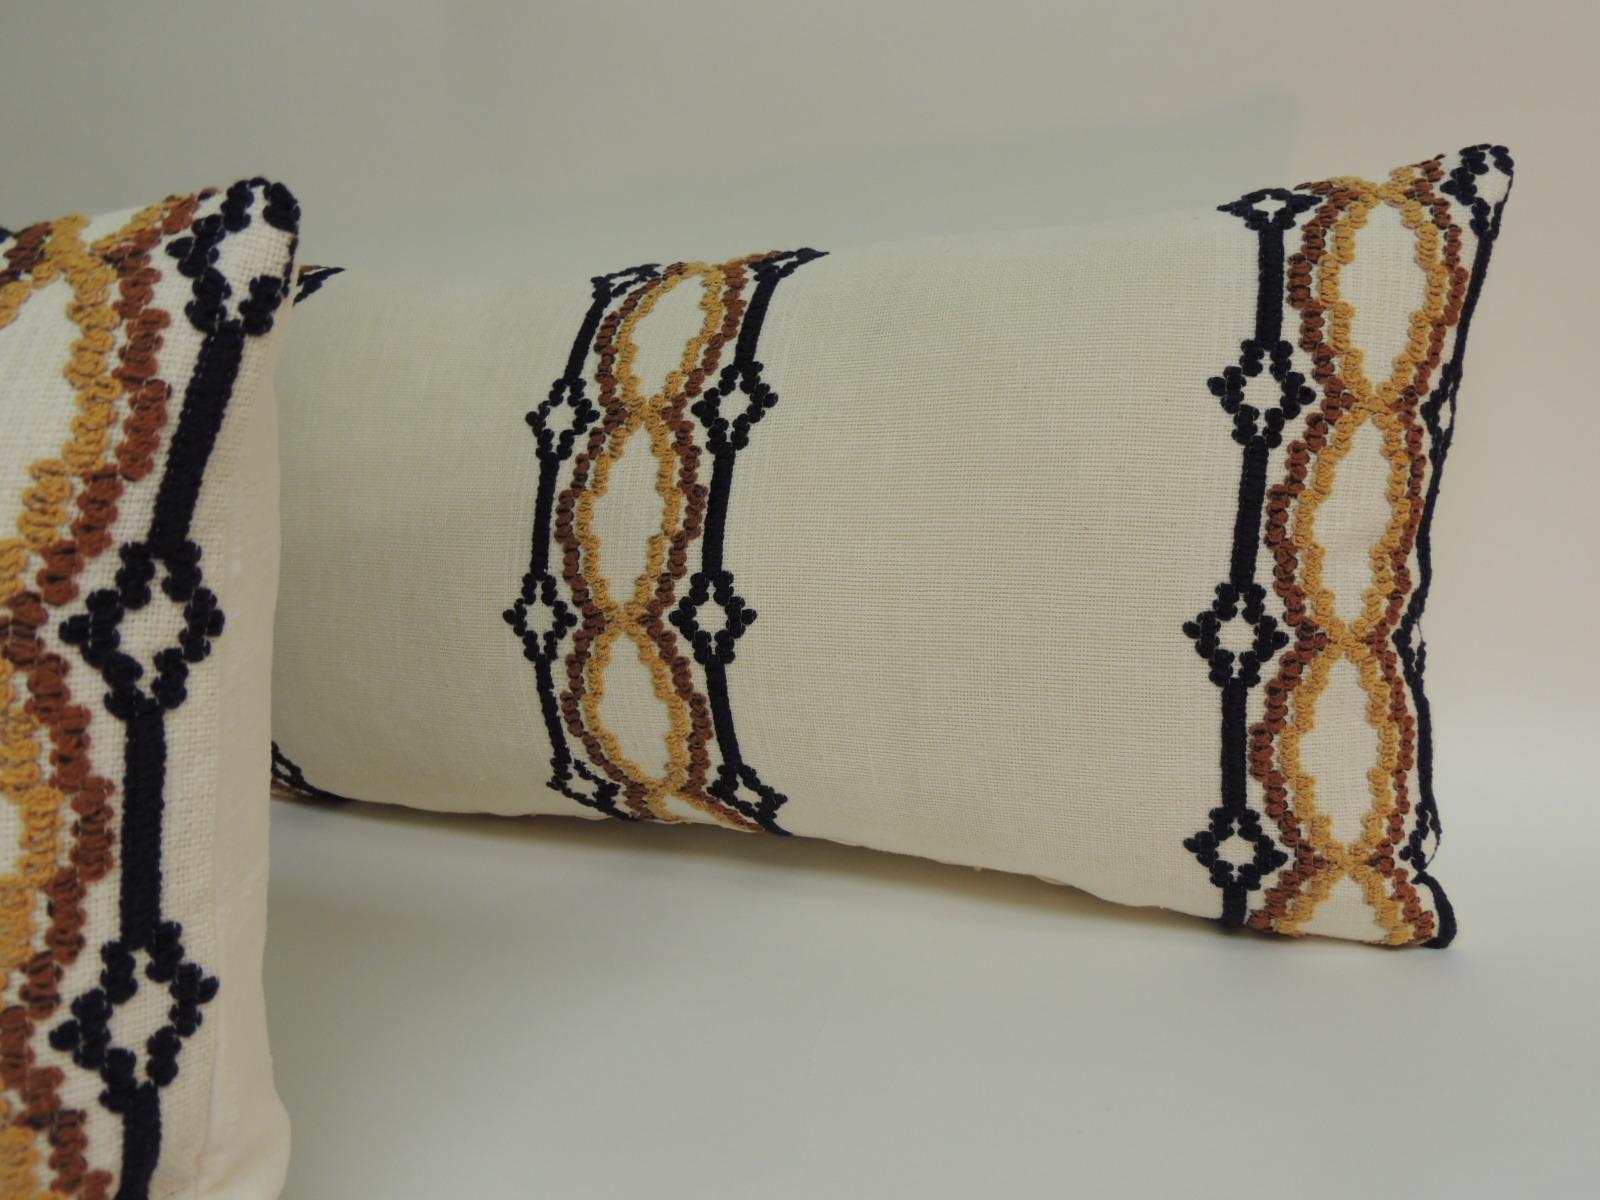 Pair of vintage woven brown and black woven Swedish decorative bolster pillows
With natural linen backings.
Size: 13